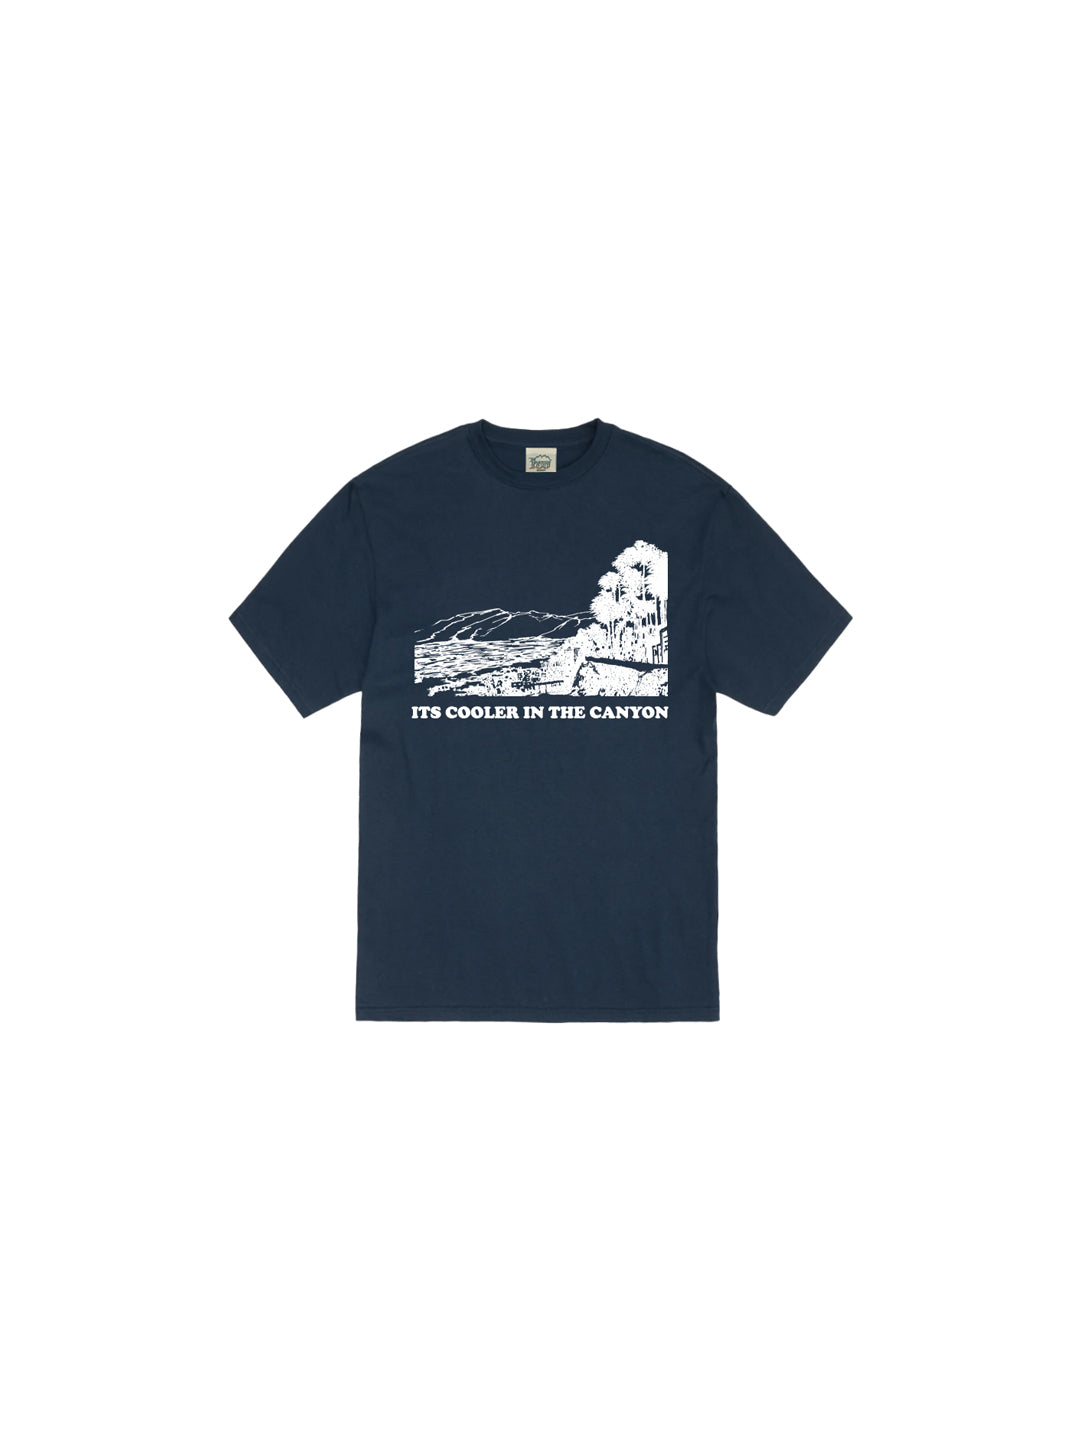 Cooler in the Canyon Youth Tee in Navy